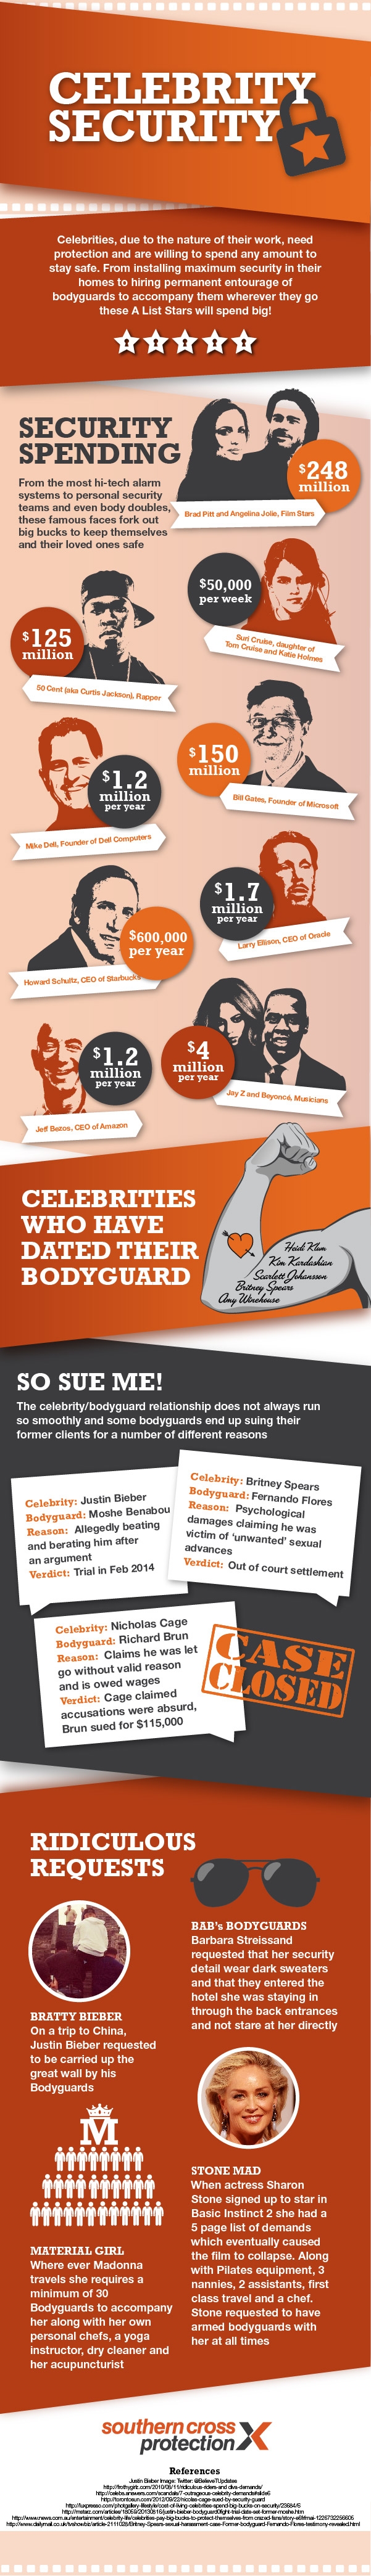 An infographic on bodyguards of the rich and famous